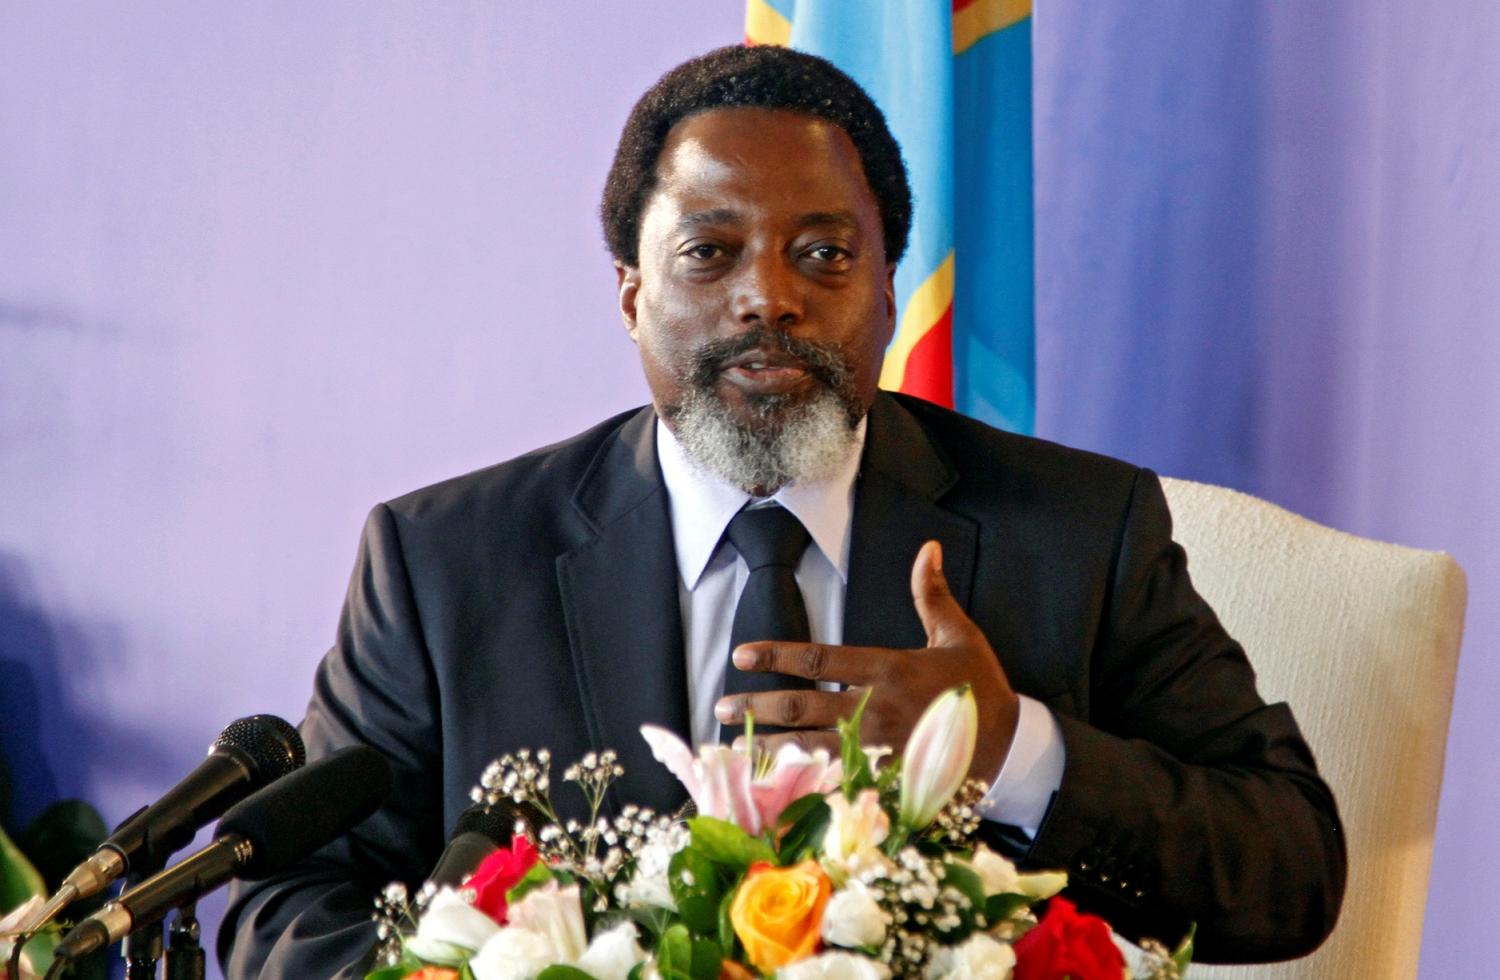 FILE PHOTO: Democratic Republic of Congo's President Joseph Kabila addresses a news conference at the State House in Kinshasa, Democratic Republic of Congo January 26, 2018. REUTERS/Kenny Katombe/File Photo - RC1158813D80